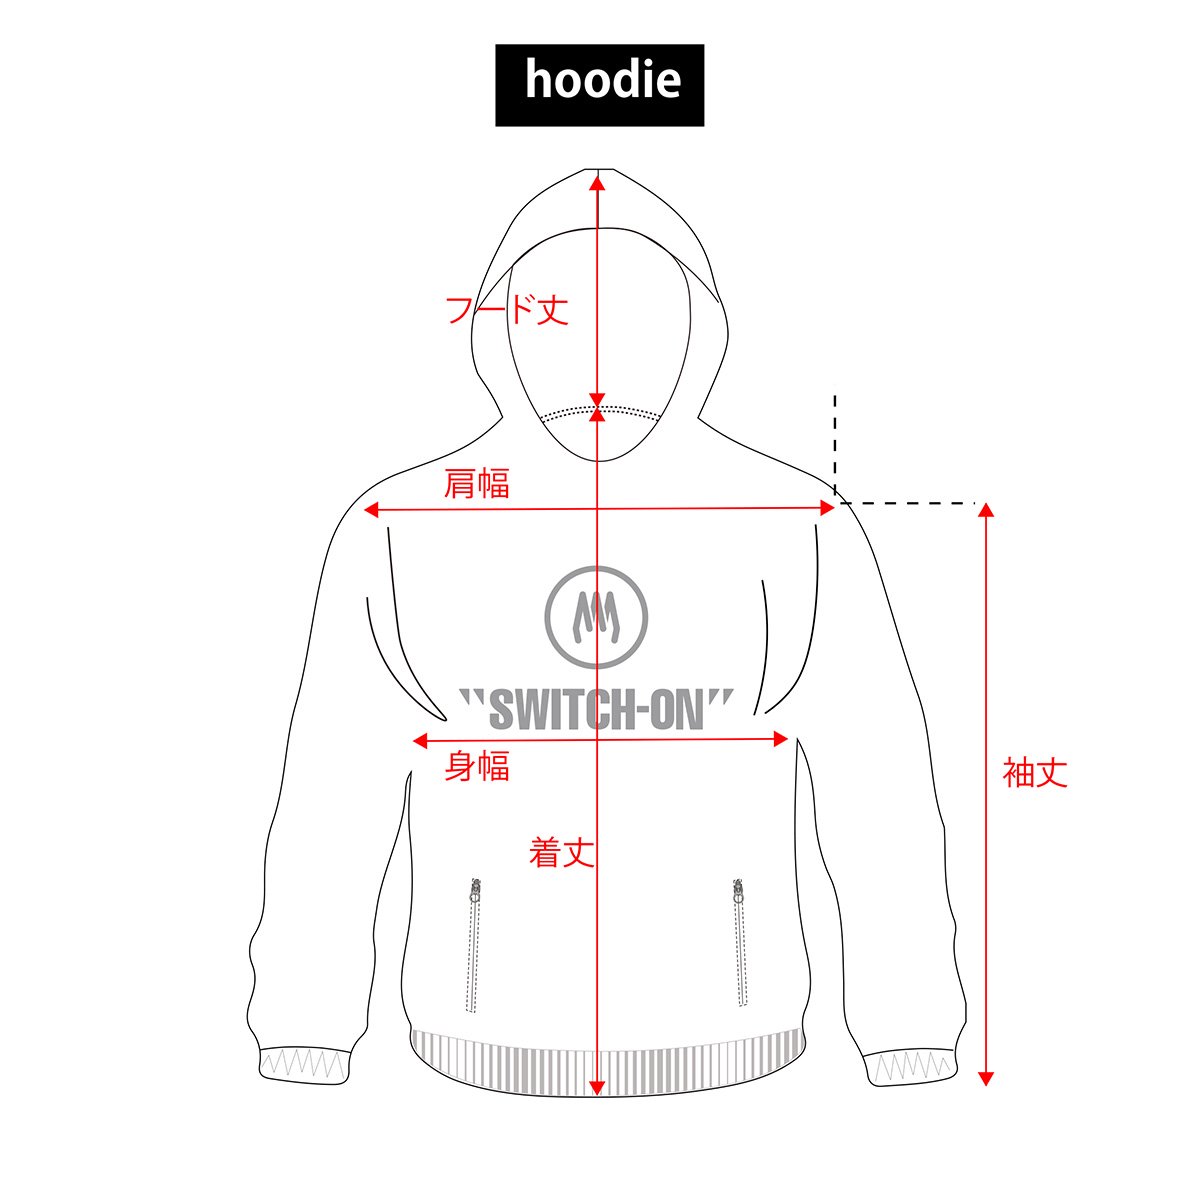 <img class='new_mark_img1' src='https://img.shop-pro.jp/img/new/icons20.gif' style='border:none;display:inline;margin:0px;padding:0px;width:auto;' />EZ stretch hoodie